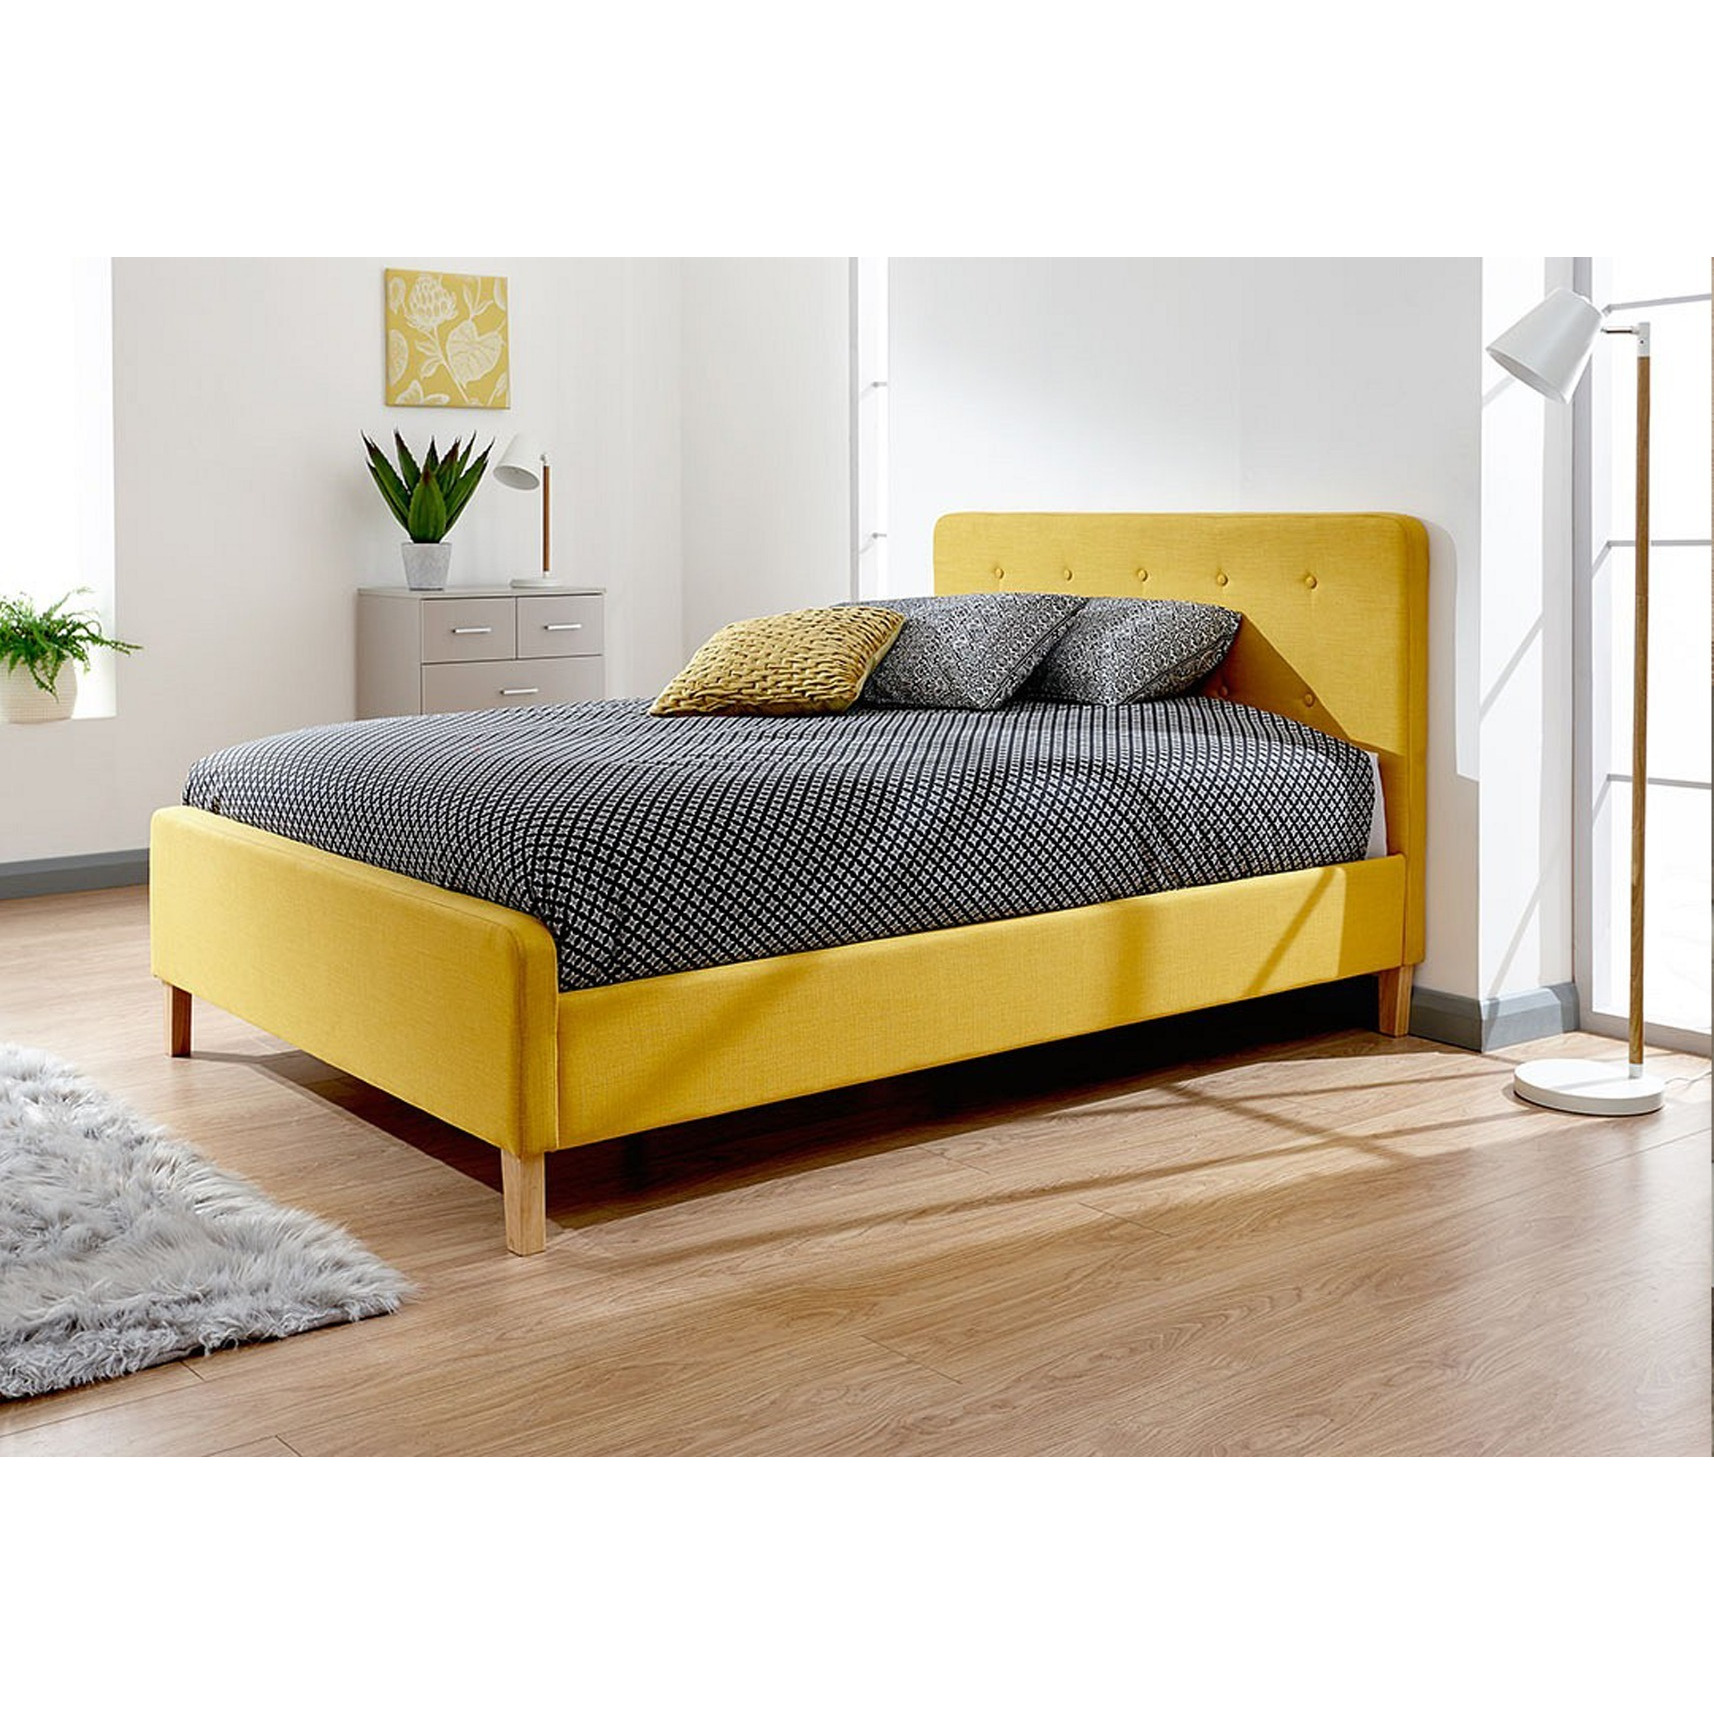 GFW Ashbourne Mustard Fabric Bed Frame - image 1